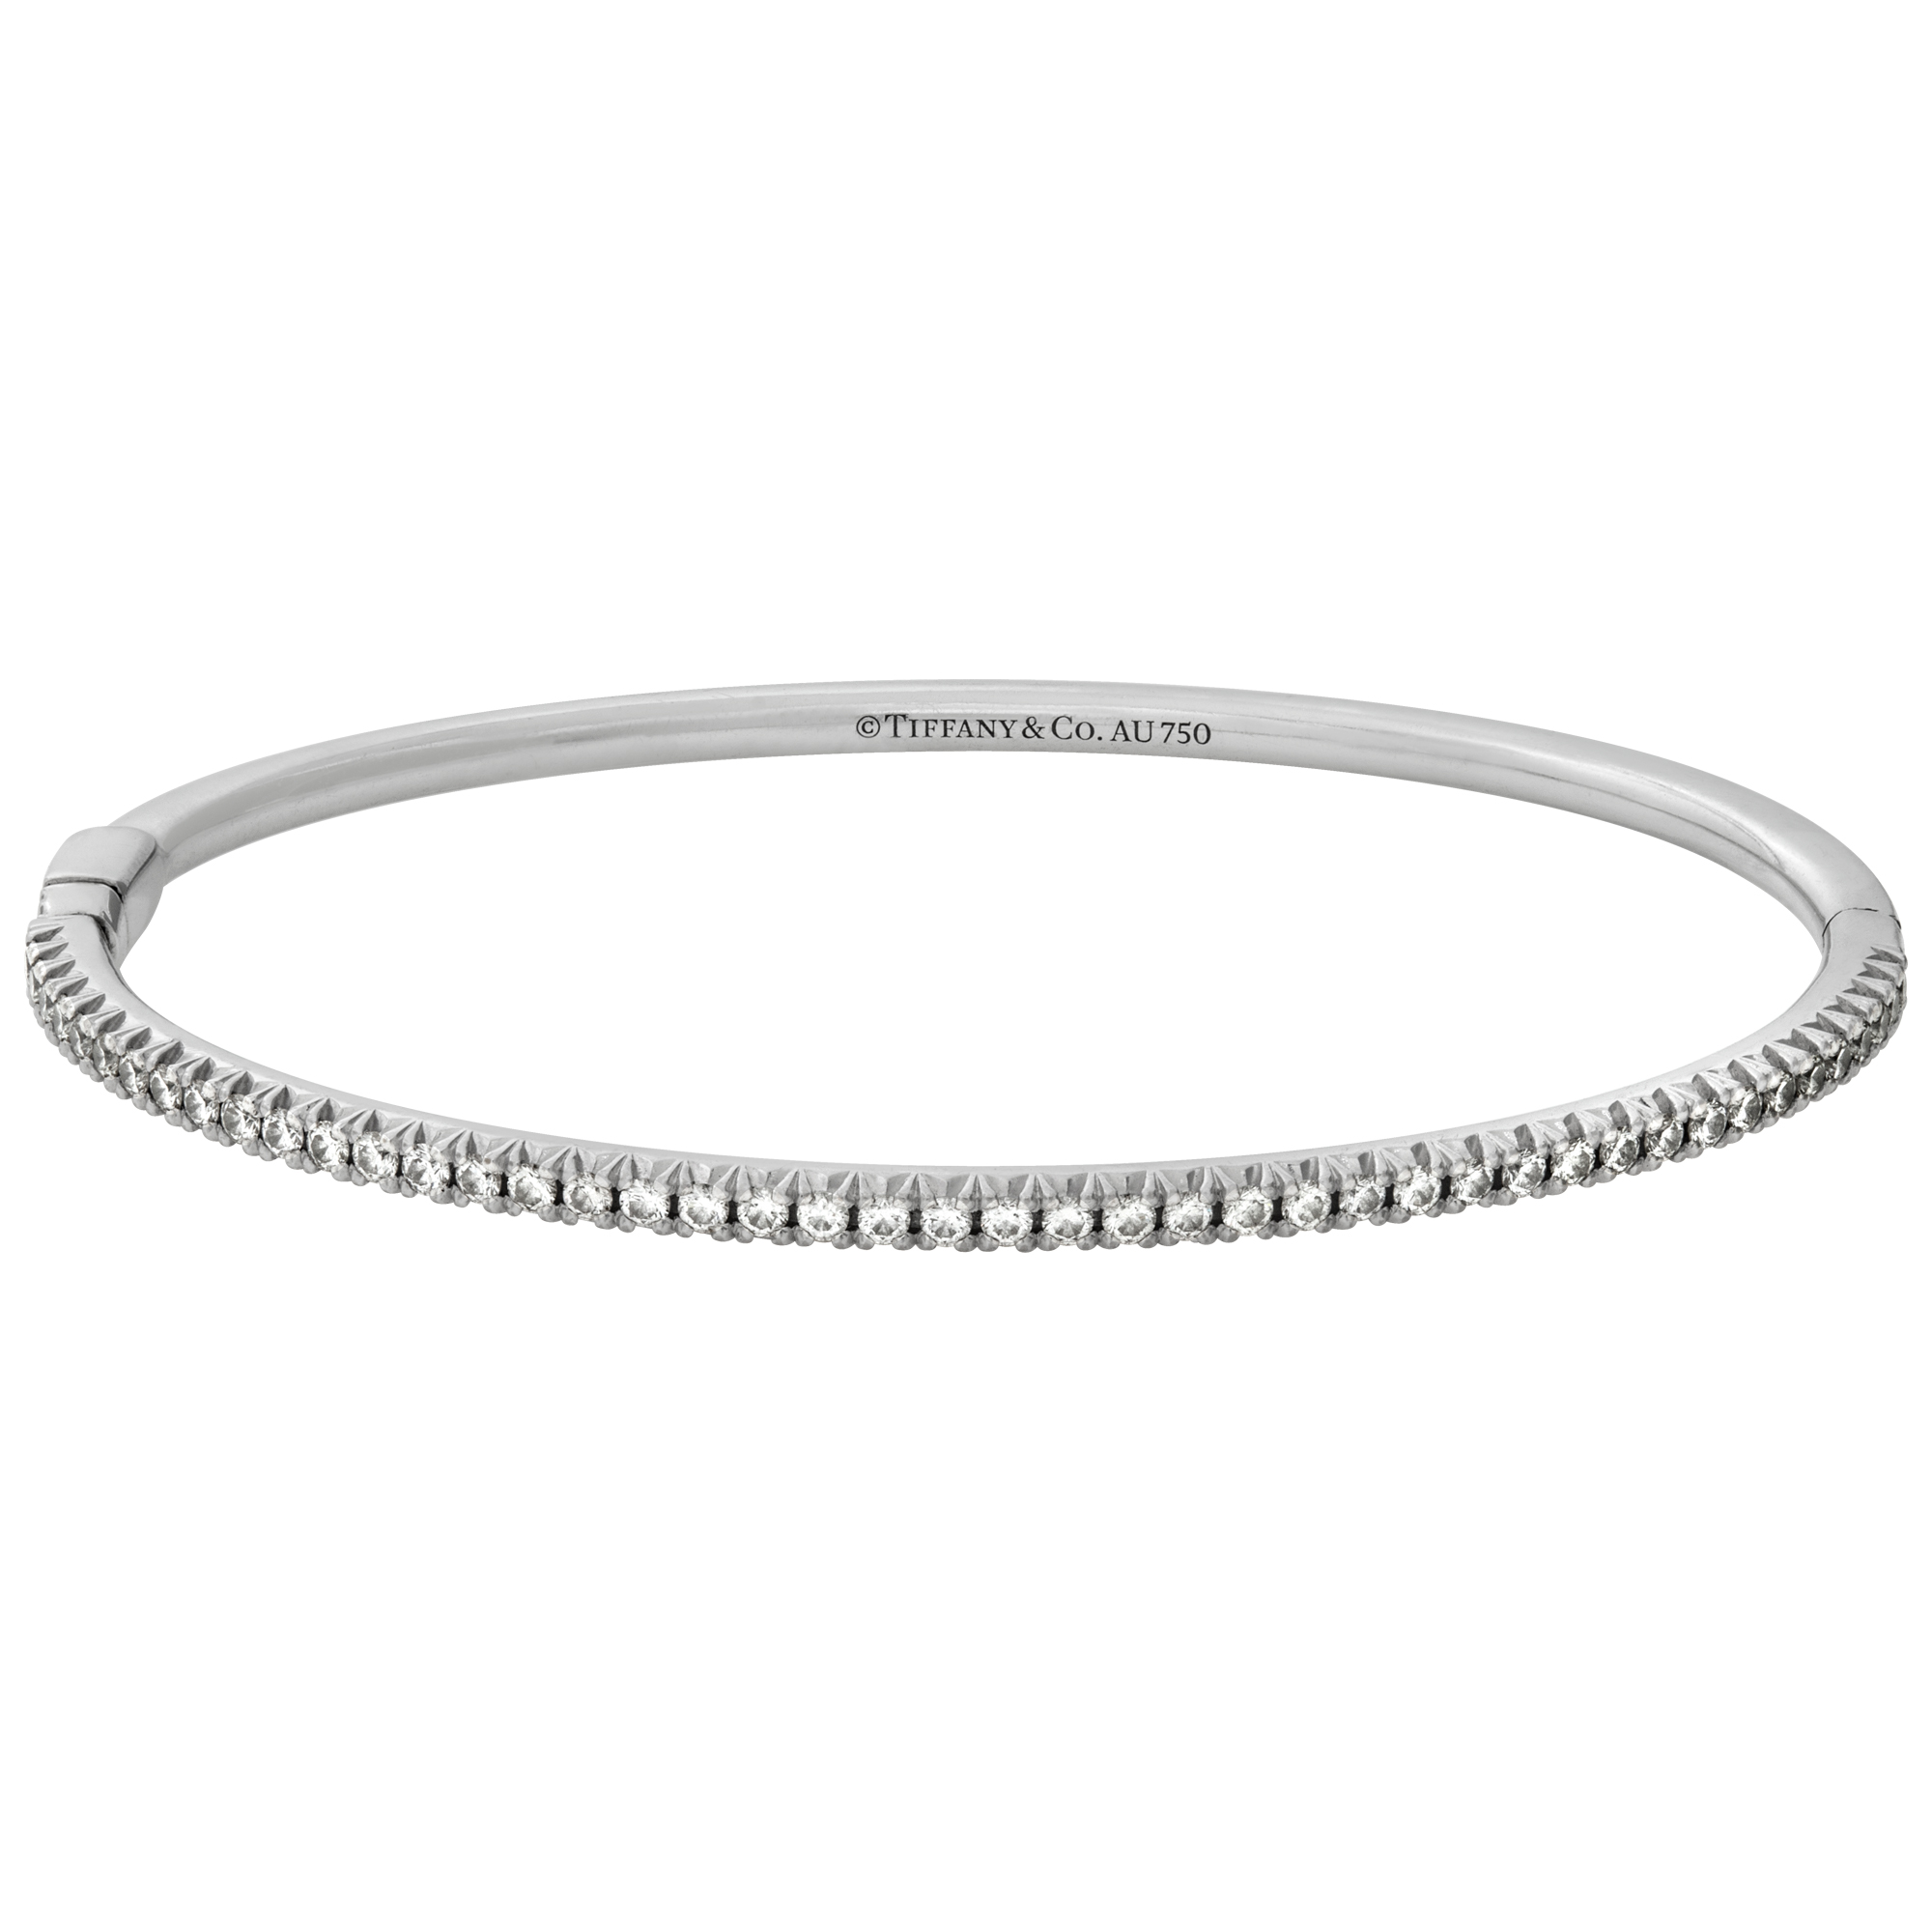 Tiffany & Co Metro hinged bangle in 18k white gold with 0.73 carats in diamonds